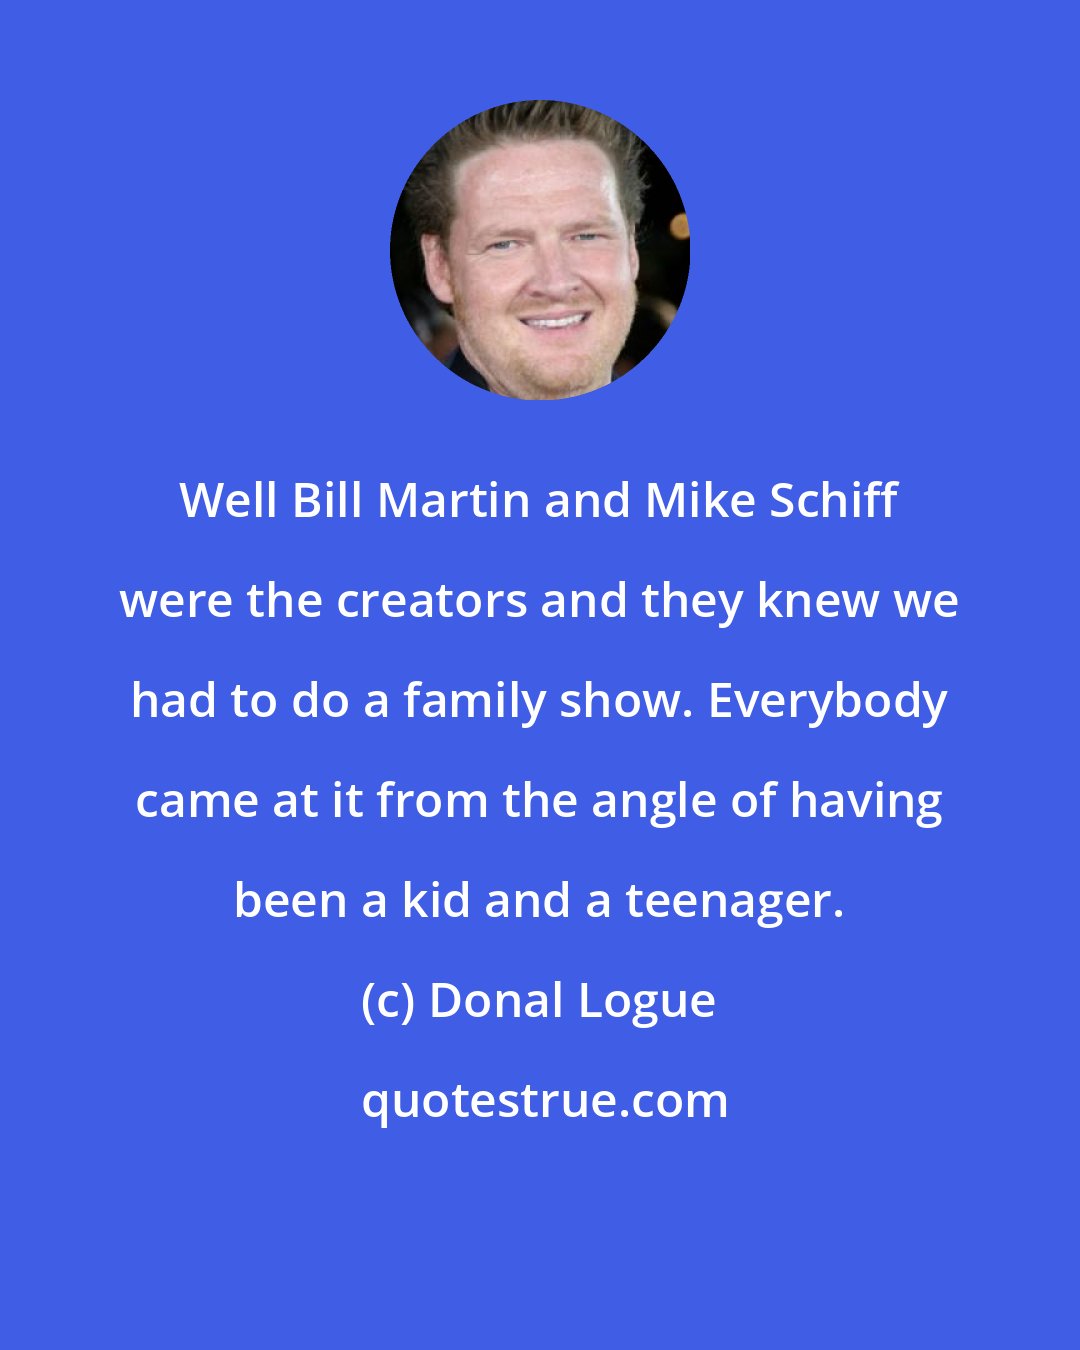 Donal Logue: Well Bill Martin and Mike Schiff were the creators and they knew we had to do a family show. Everybody came at it from the angle of having been a kid and a teenager.